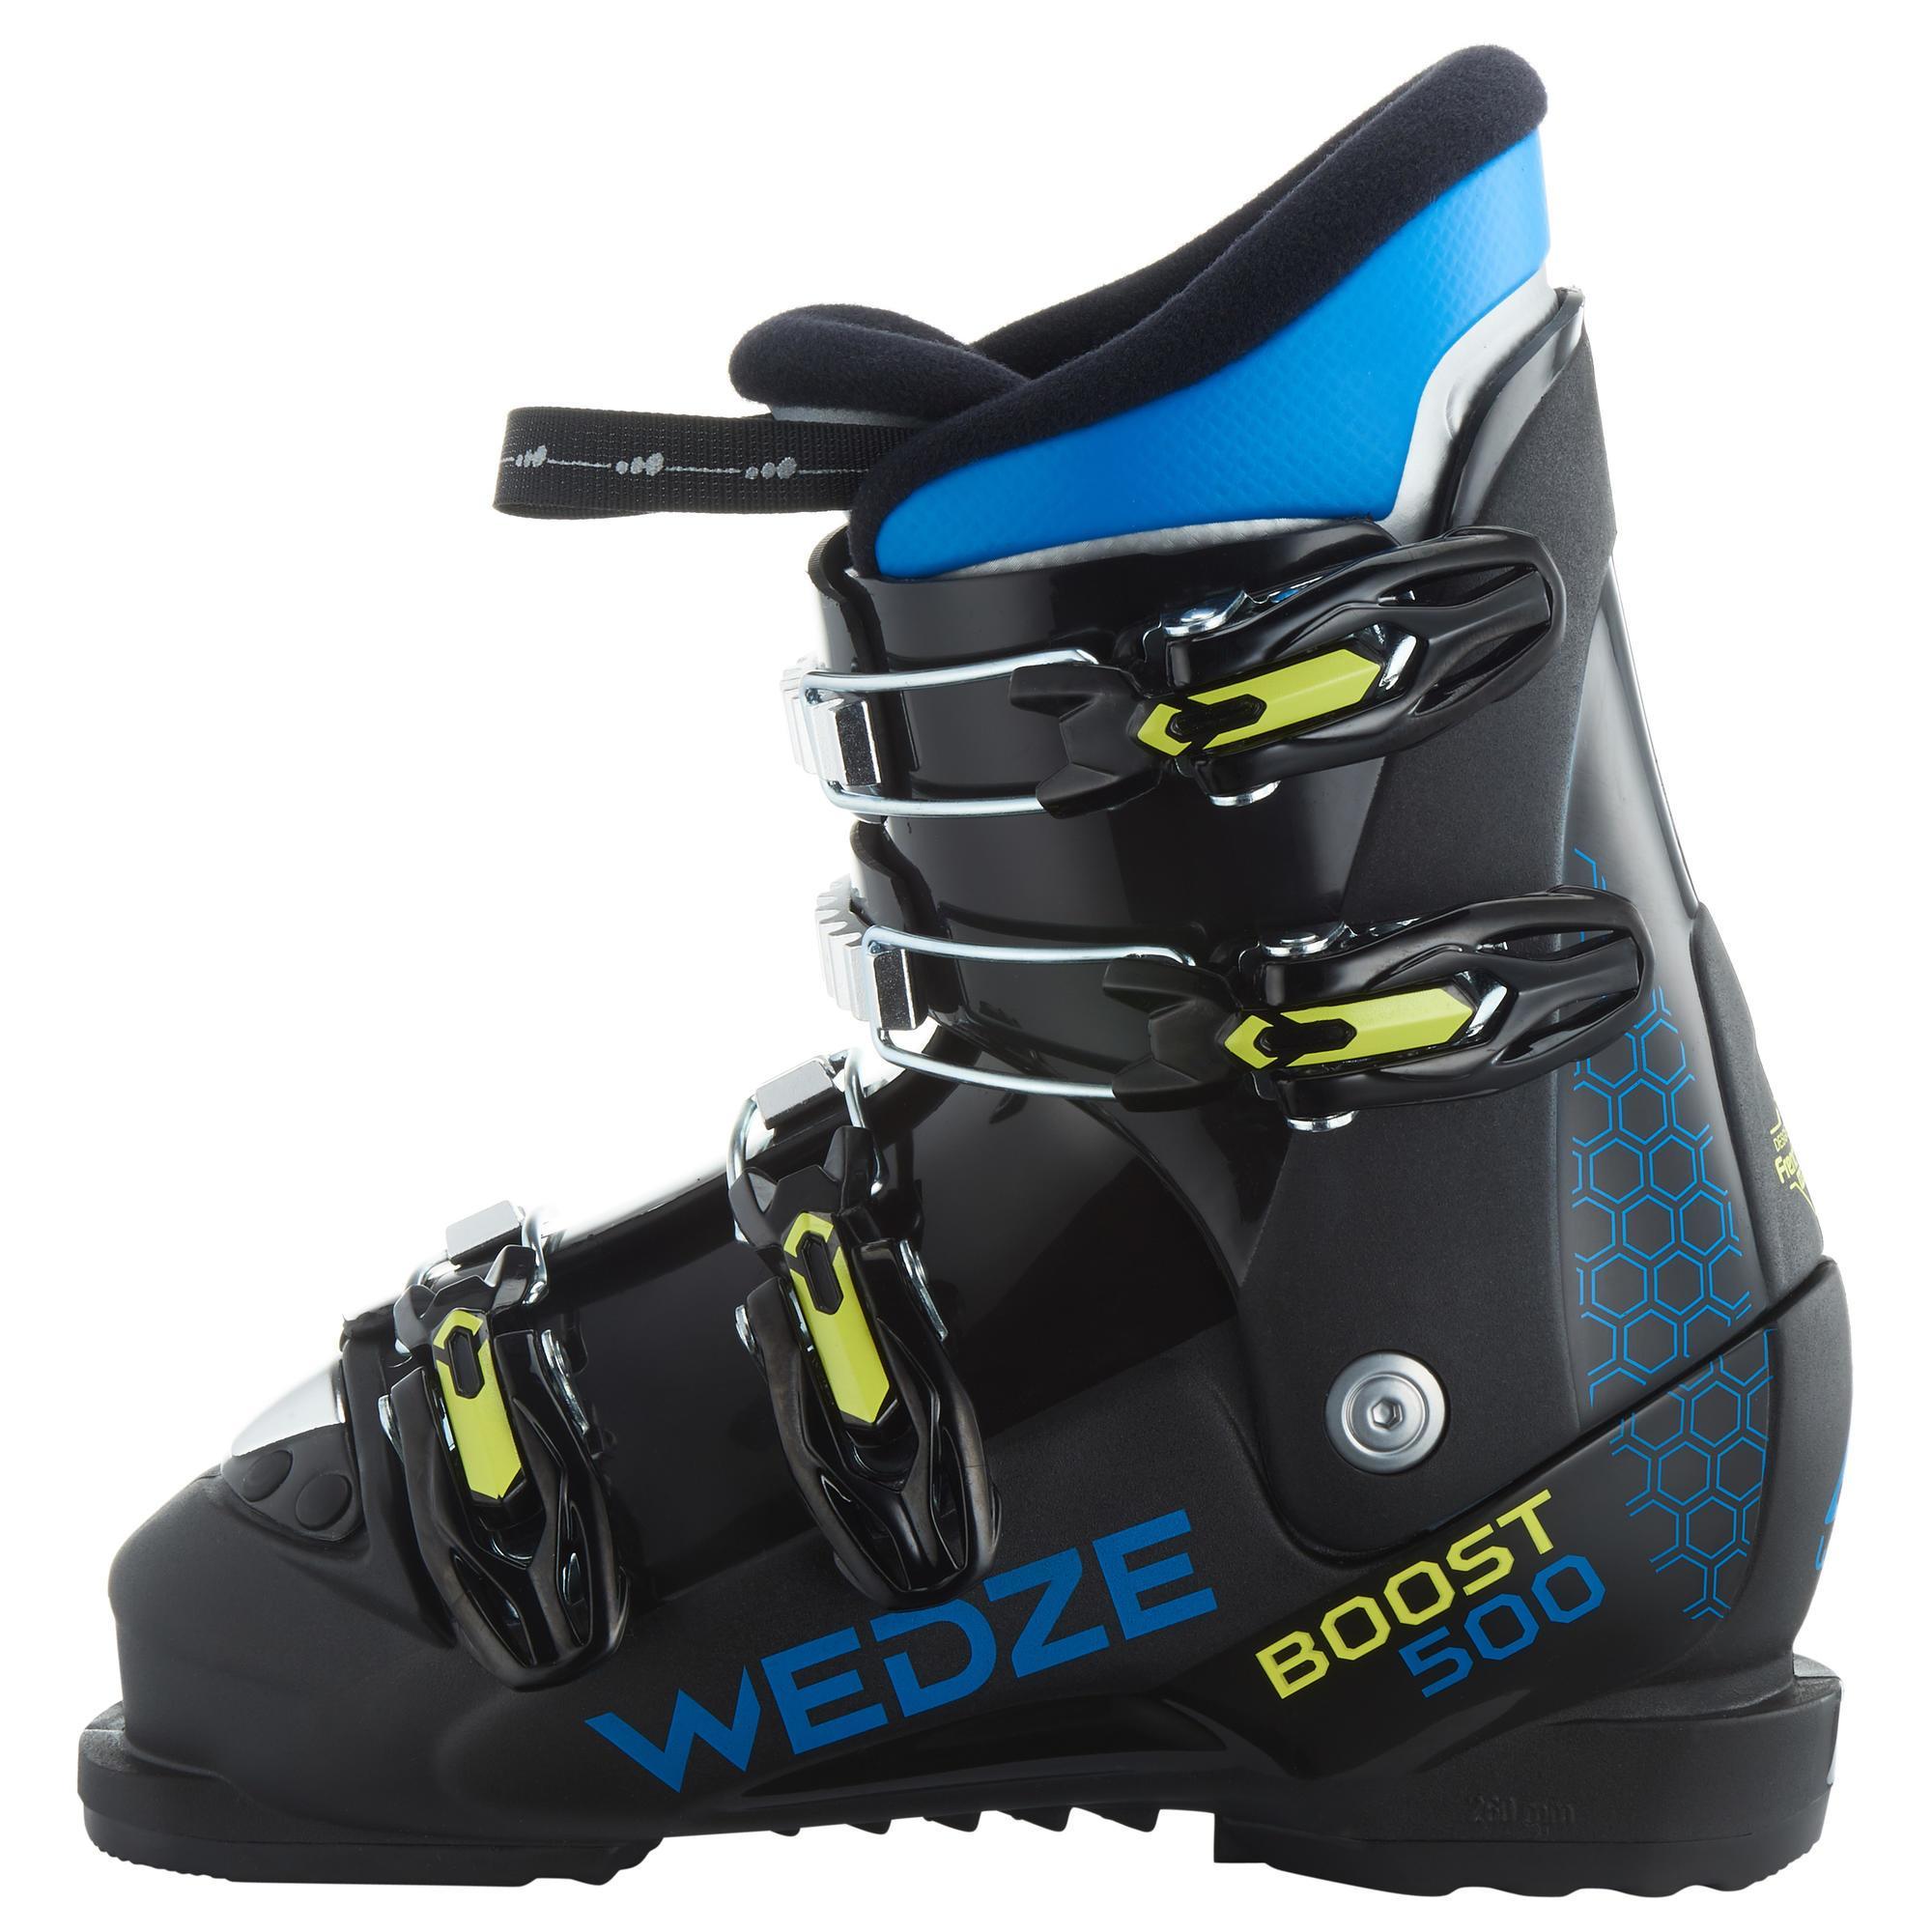 Chaussures Ski Bebe Buy Clothes Shoes Online